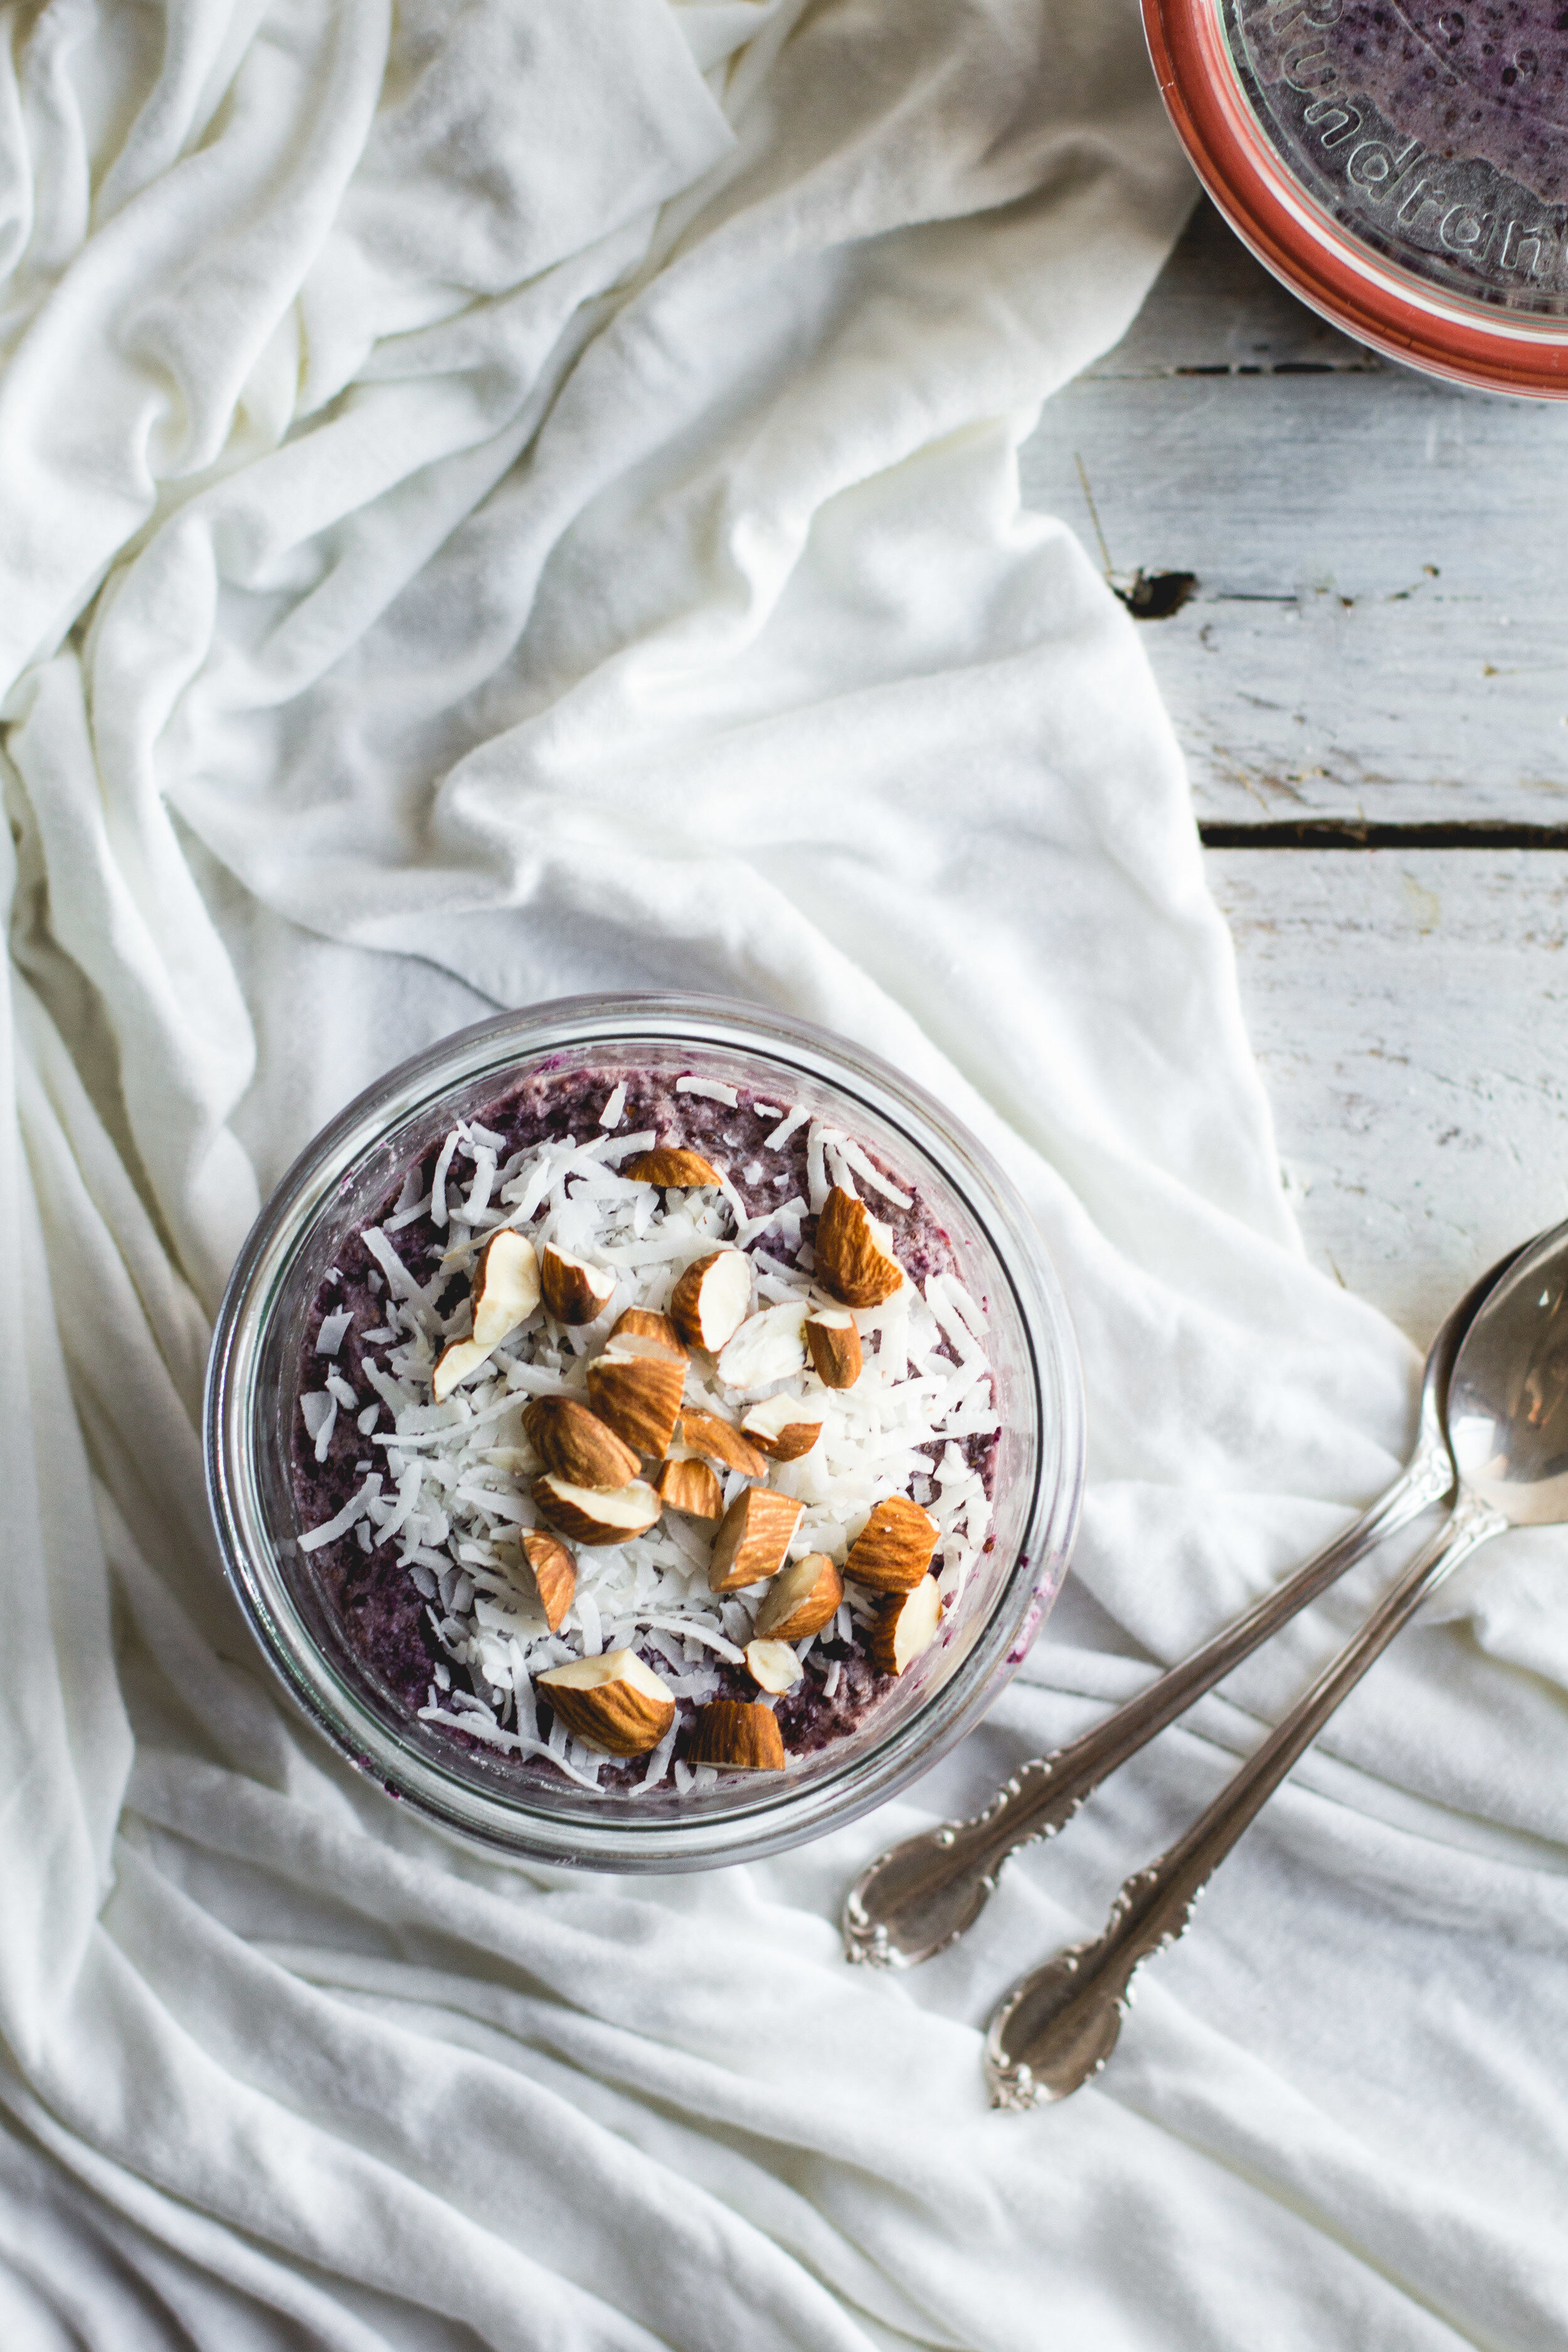 Chia Seed Pudding: Whole 30 Approved! - Well and Strong with MS